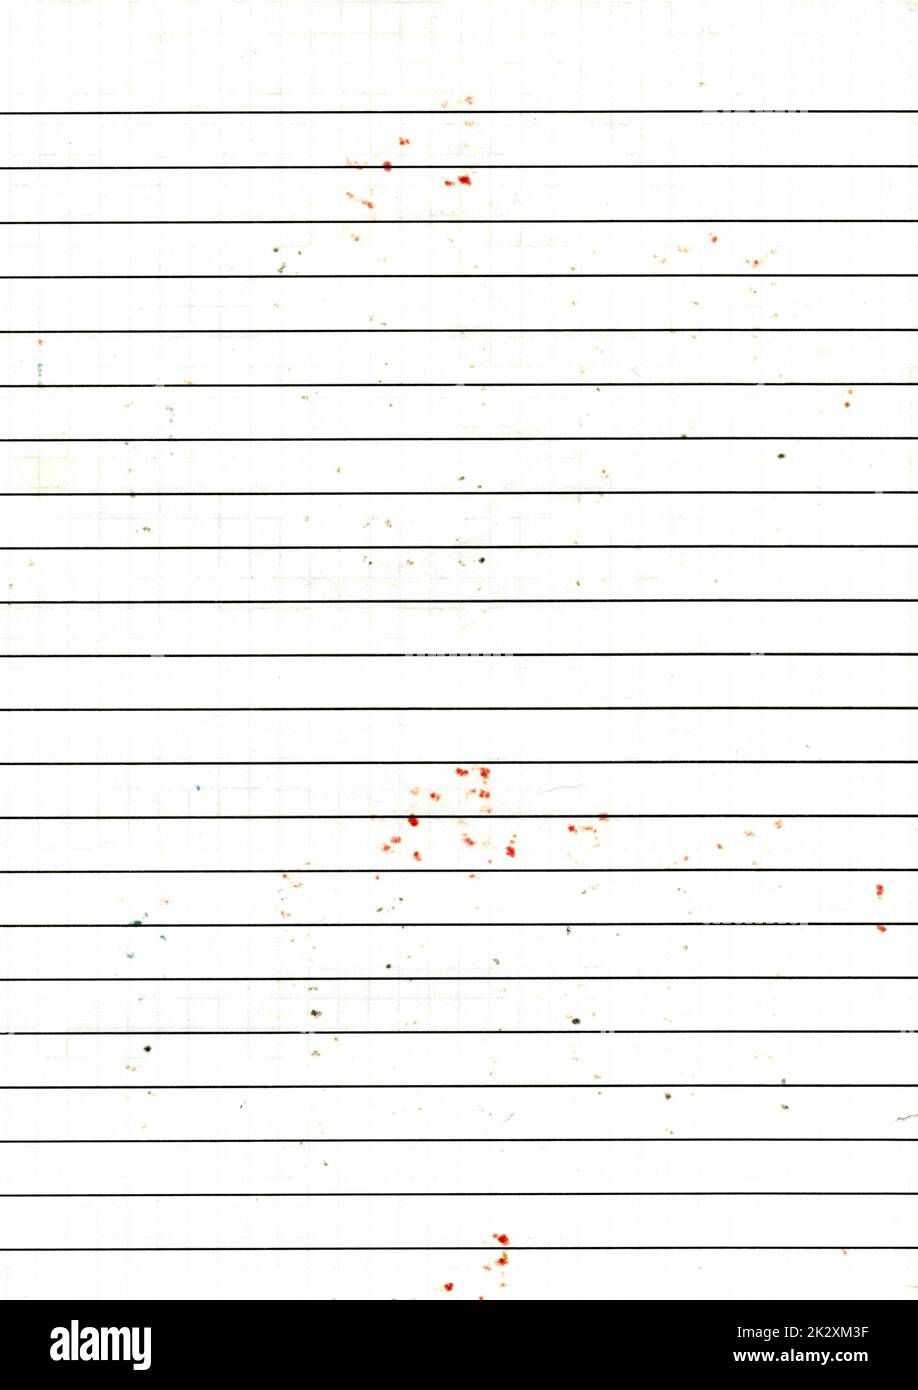 High resolution large image of used, worn out line graph paper texture background scan with color stain spots from writing with markers, weathered old school paper wallpaper with copy space for text Stock Photo